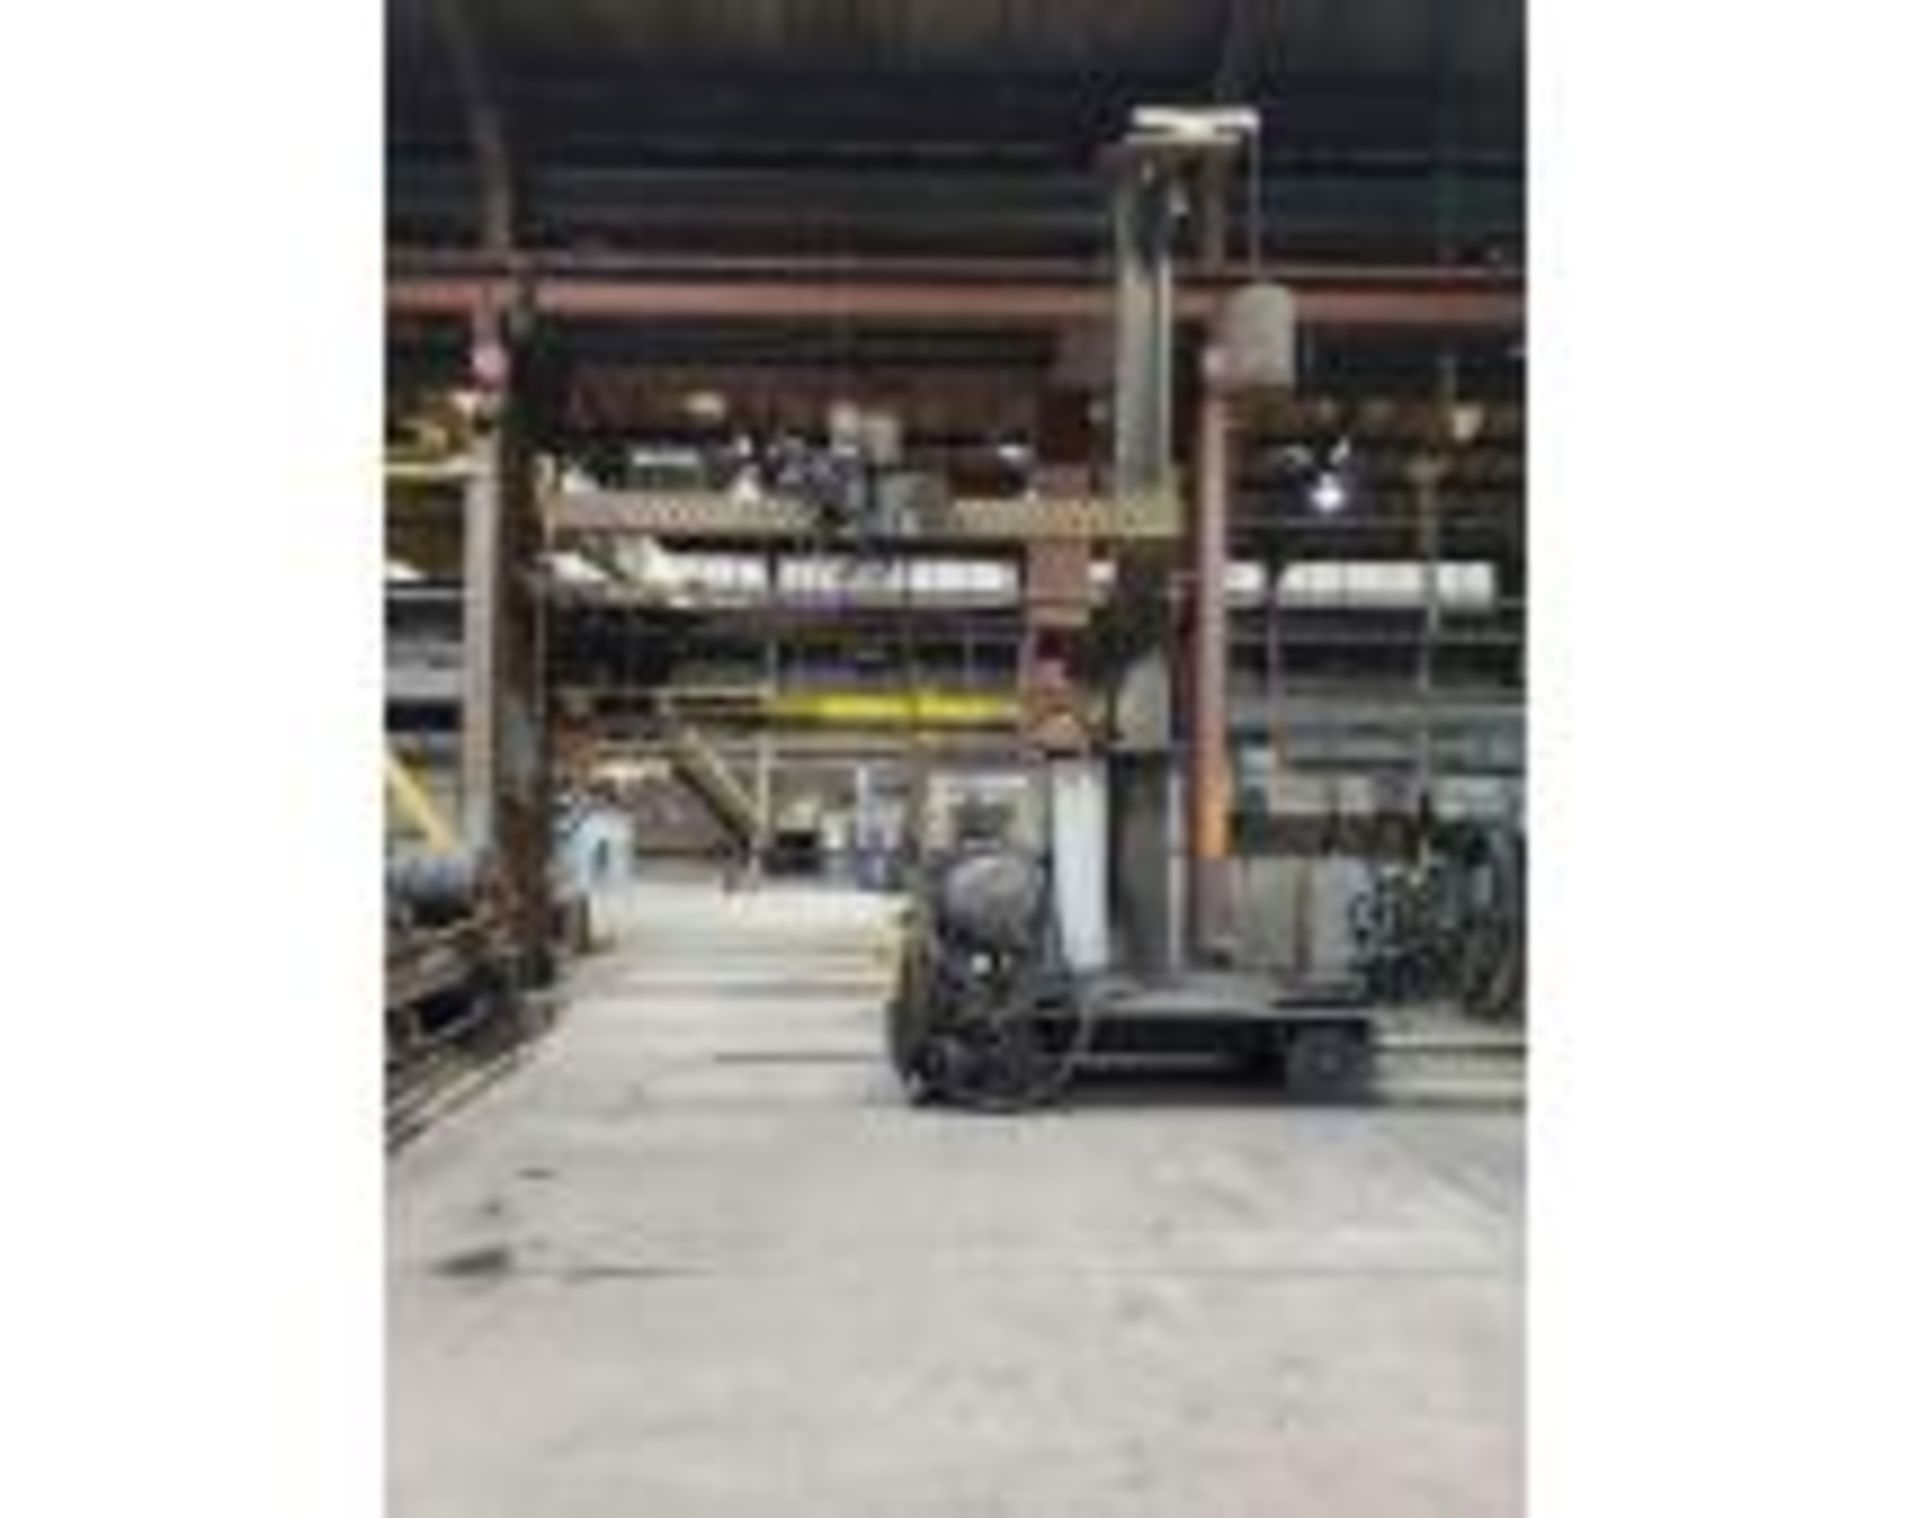 LINCOLN ELECTRIC WELDING MANIPULATORS RADIAL TRACK WELDING SYSTEM WITH LINCOLN IDEALARC DC-1000 DC - Image 3 of 10